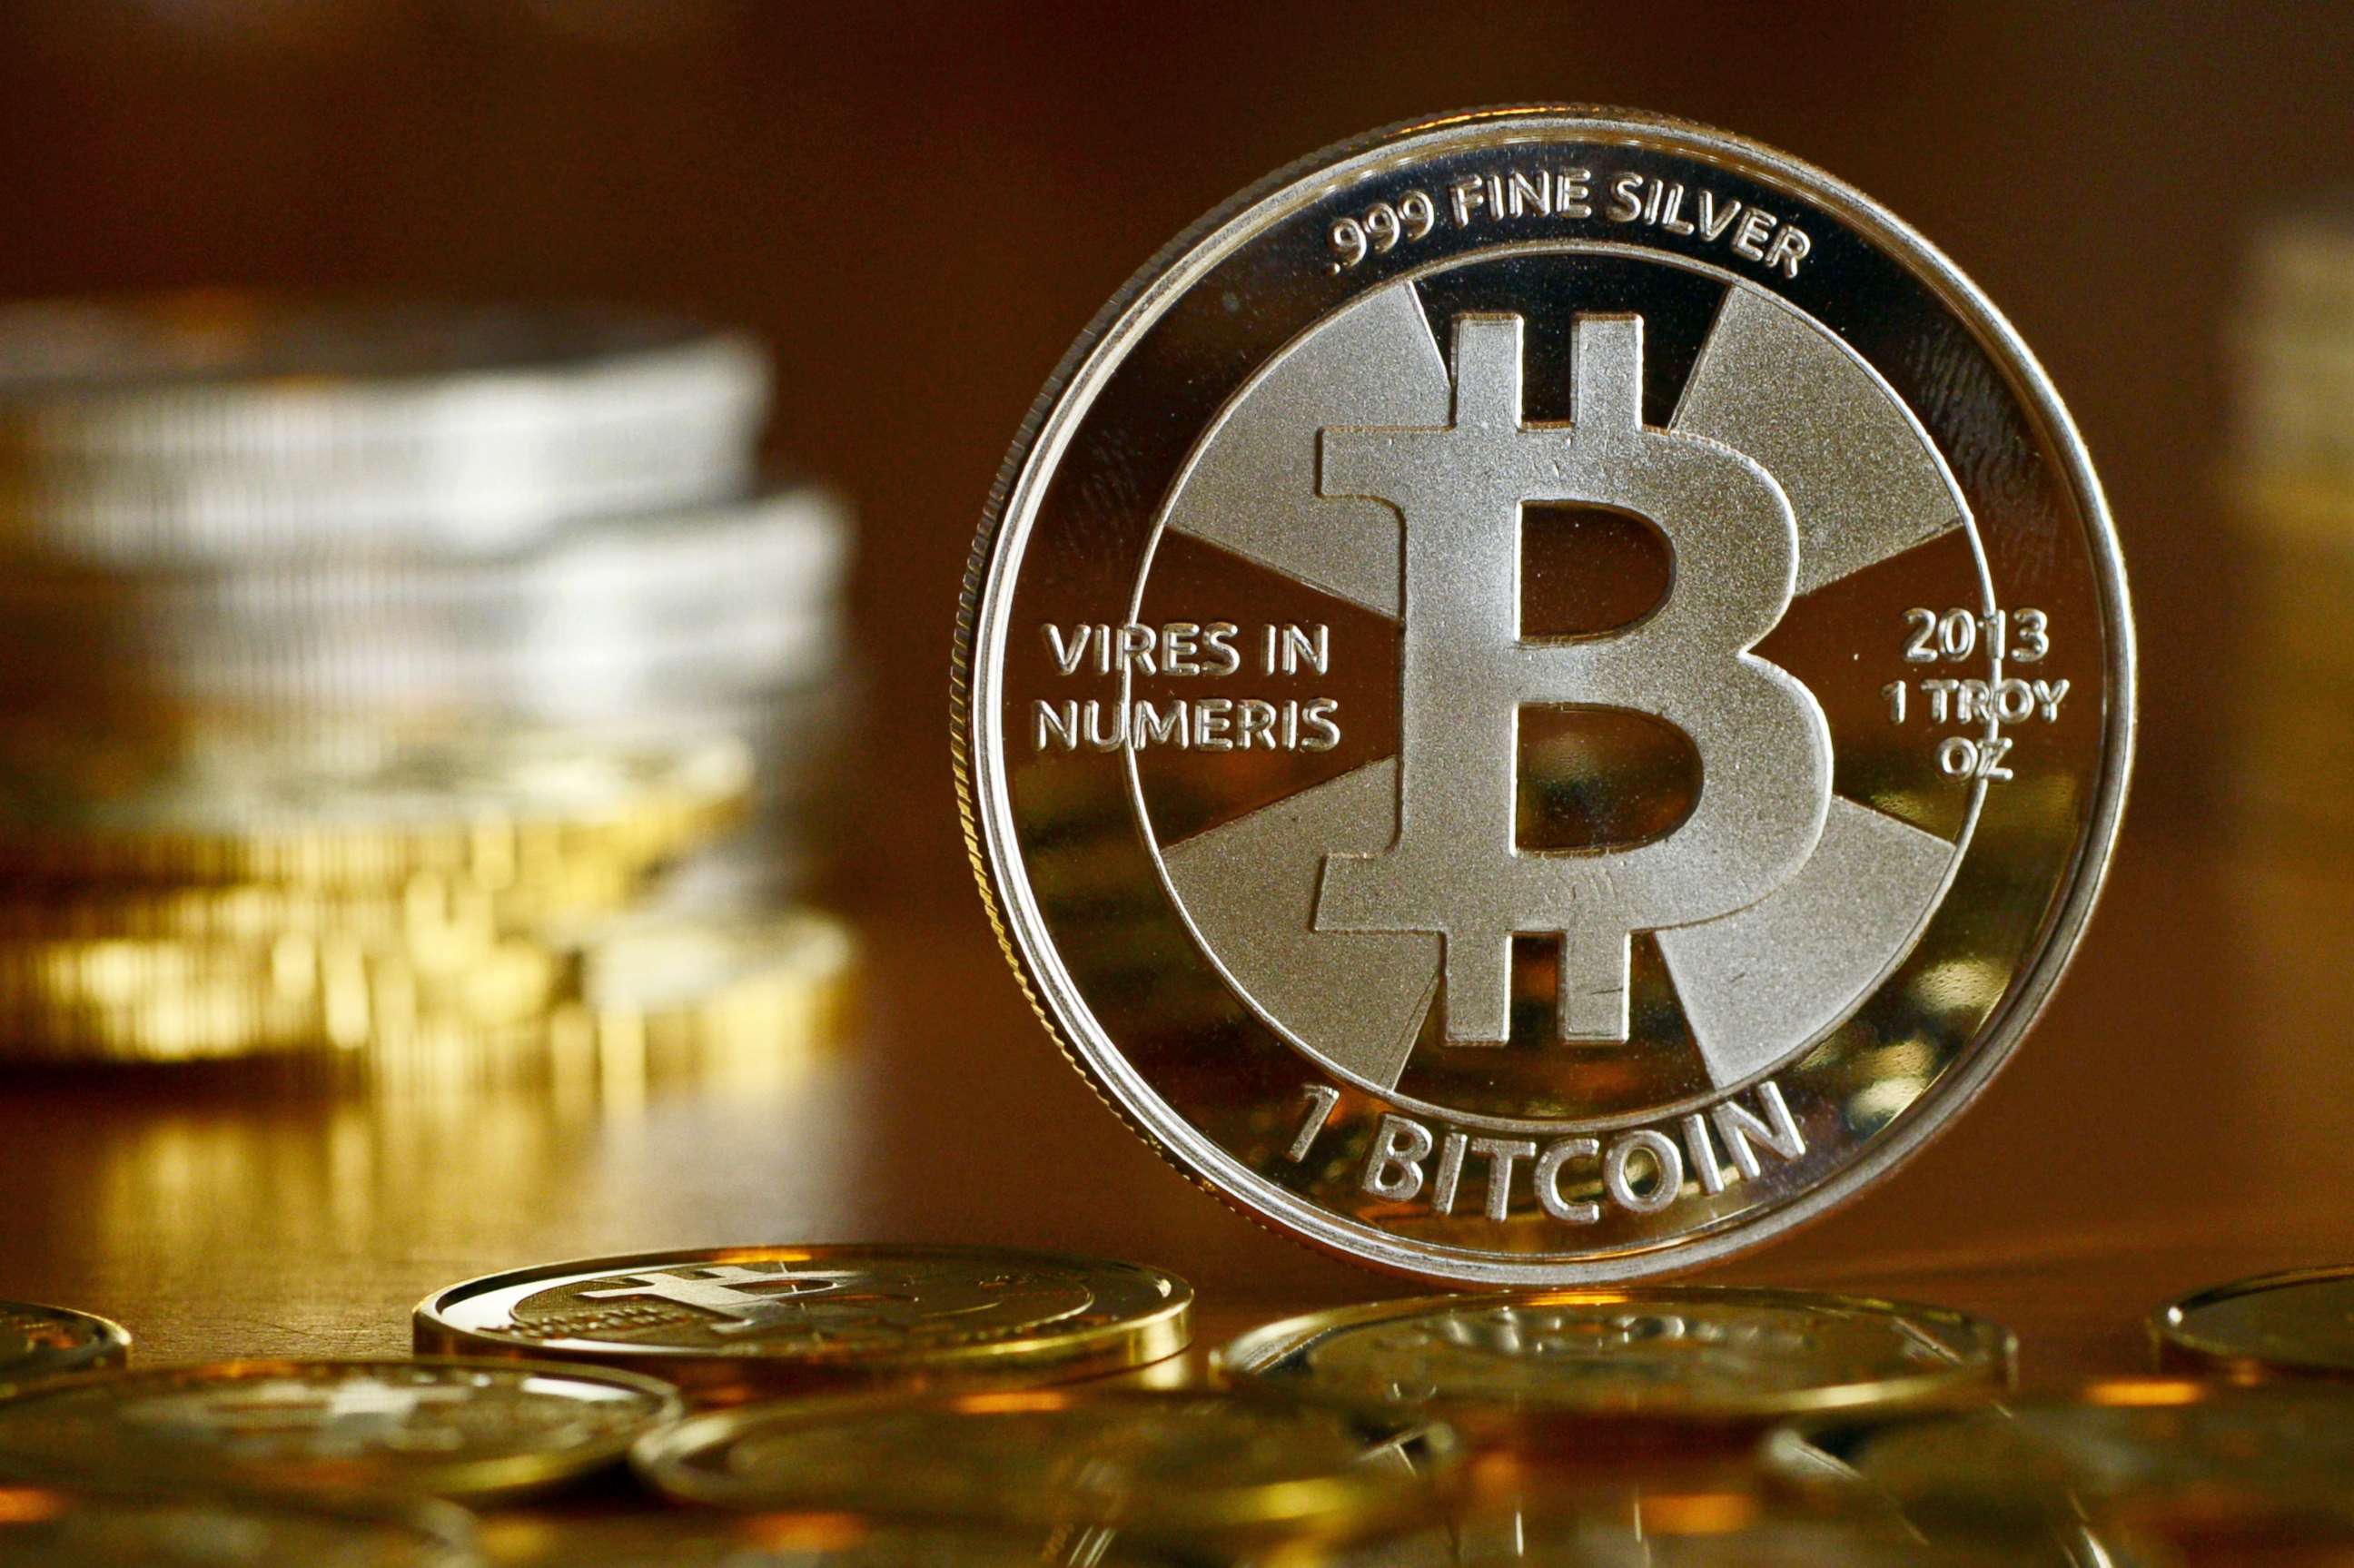 PHOTO: A Bitcoin is pictured at the coin dealer BitcoinCommodities in Berlin, Nov. 28, 2013. 